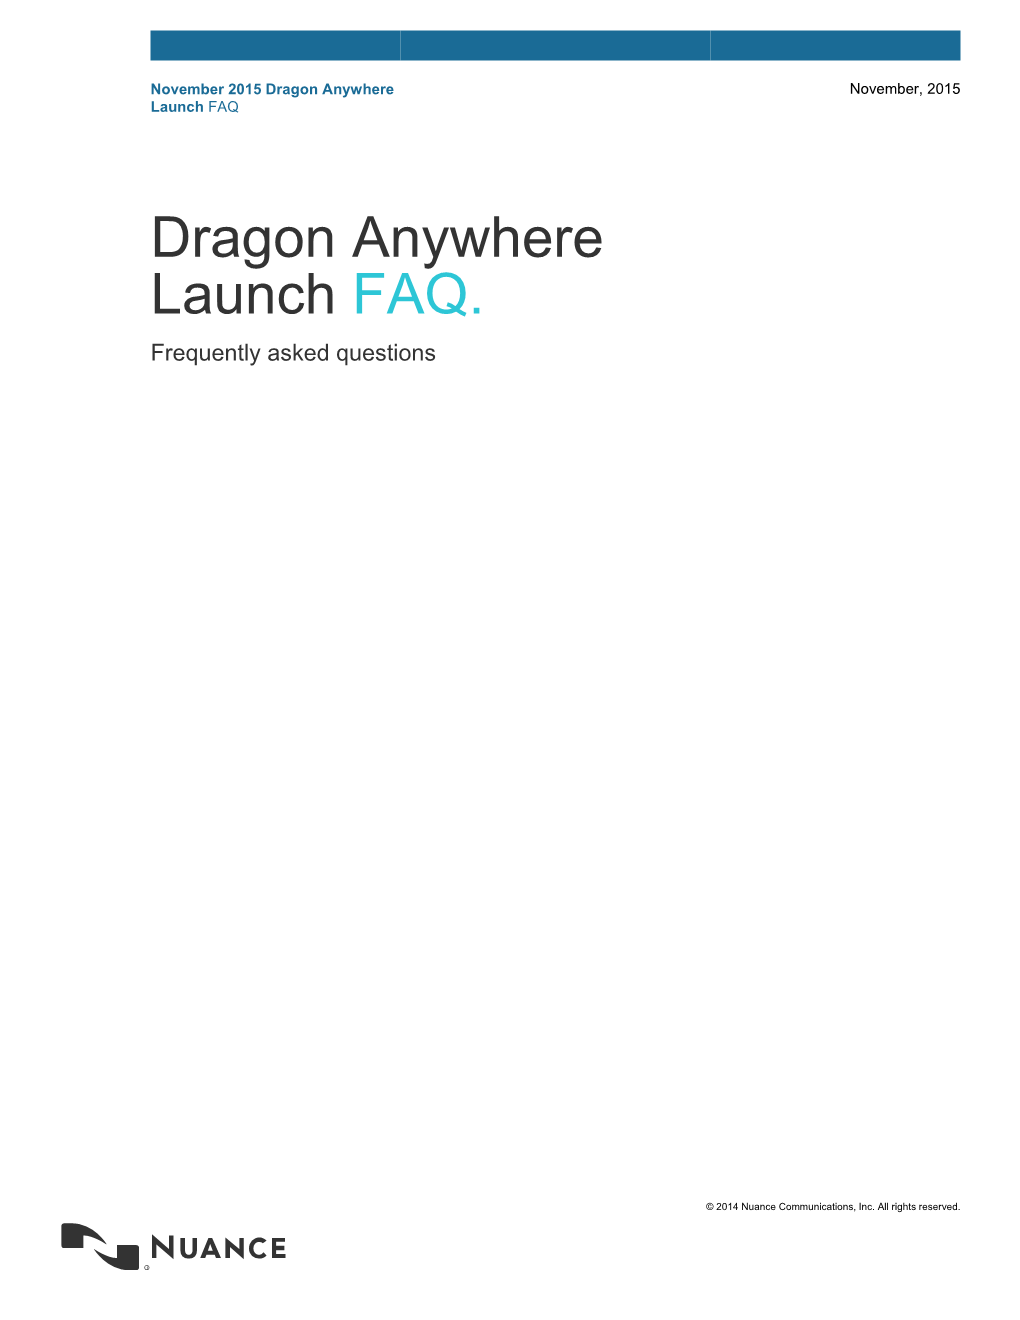 Dragon Anywhere Launch FAQ. Frequently Asked Questions